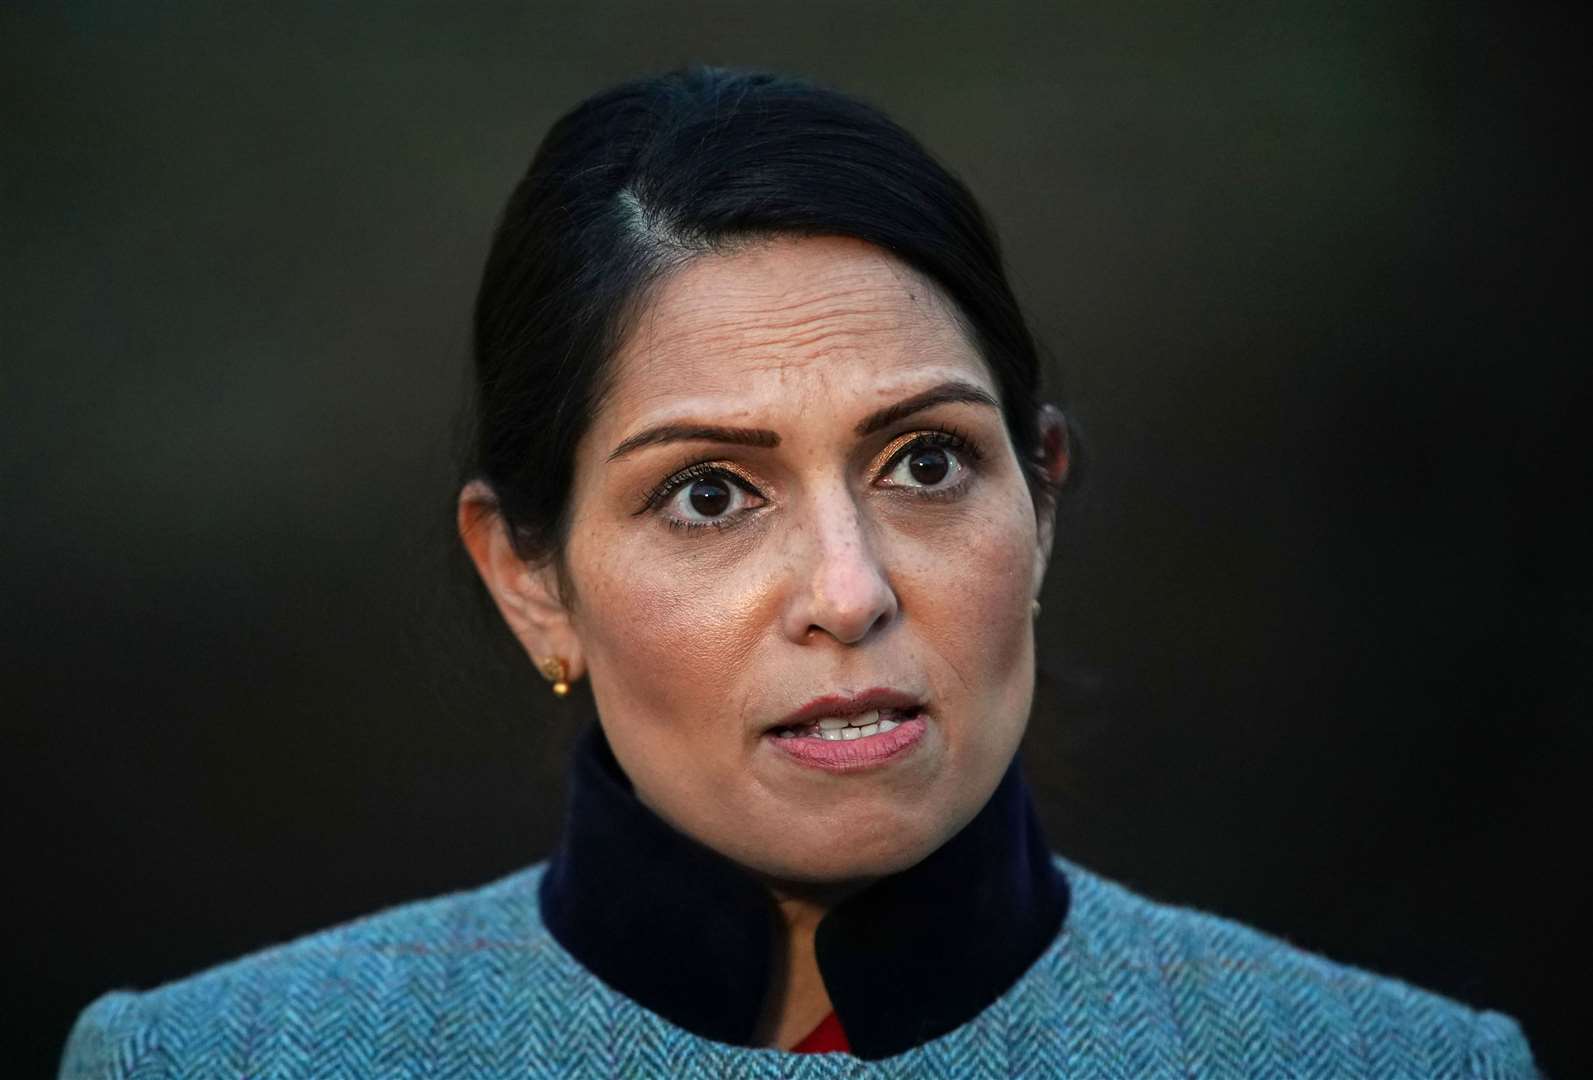 Home Secretary Priti Patel said the safety of women and girls across the country was an ‘absolute priority’ (Aaron Chown/PA)